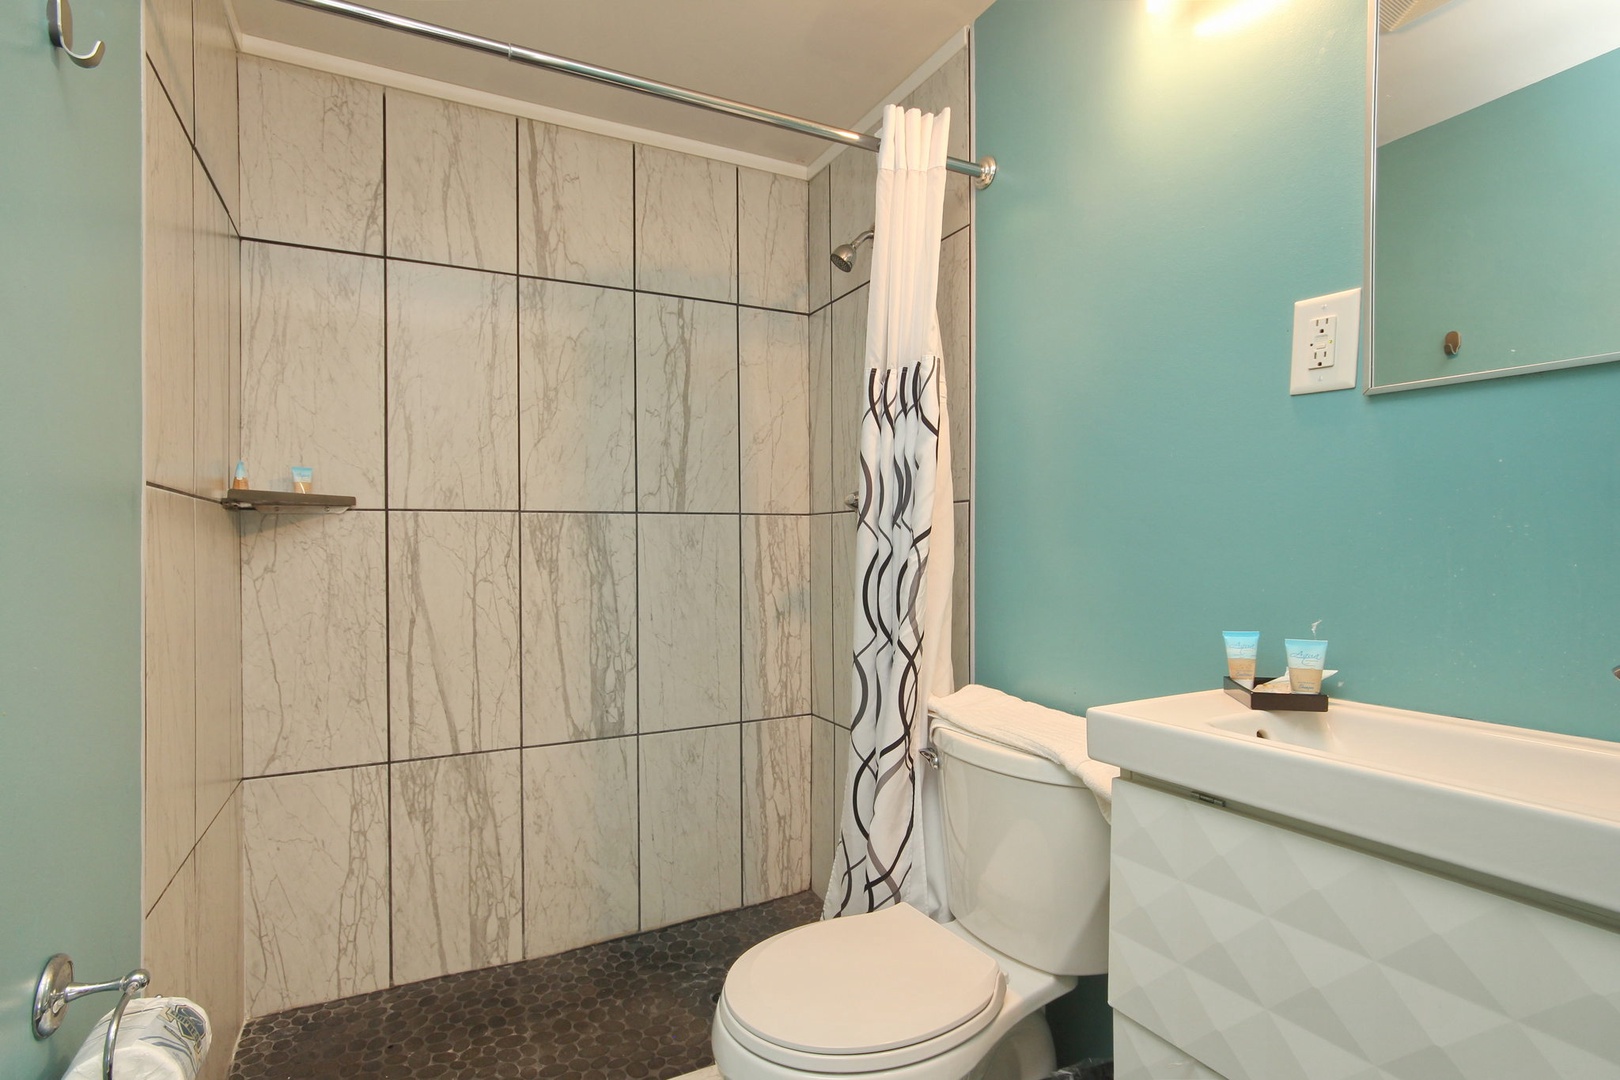 Enjoy a refreshing start with our well-stocked bathroom